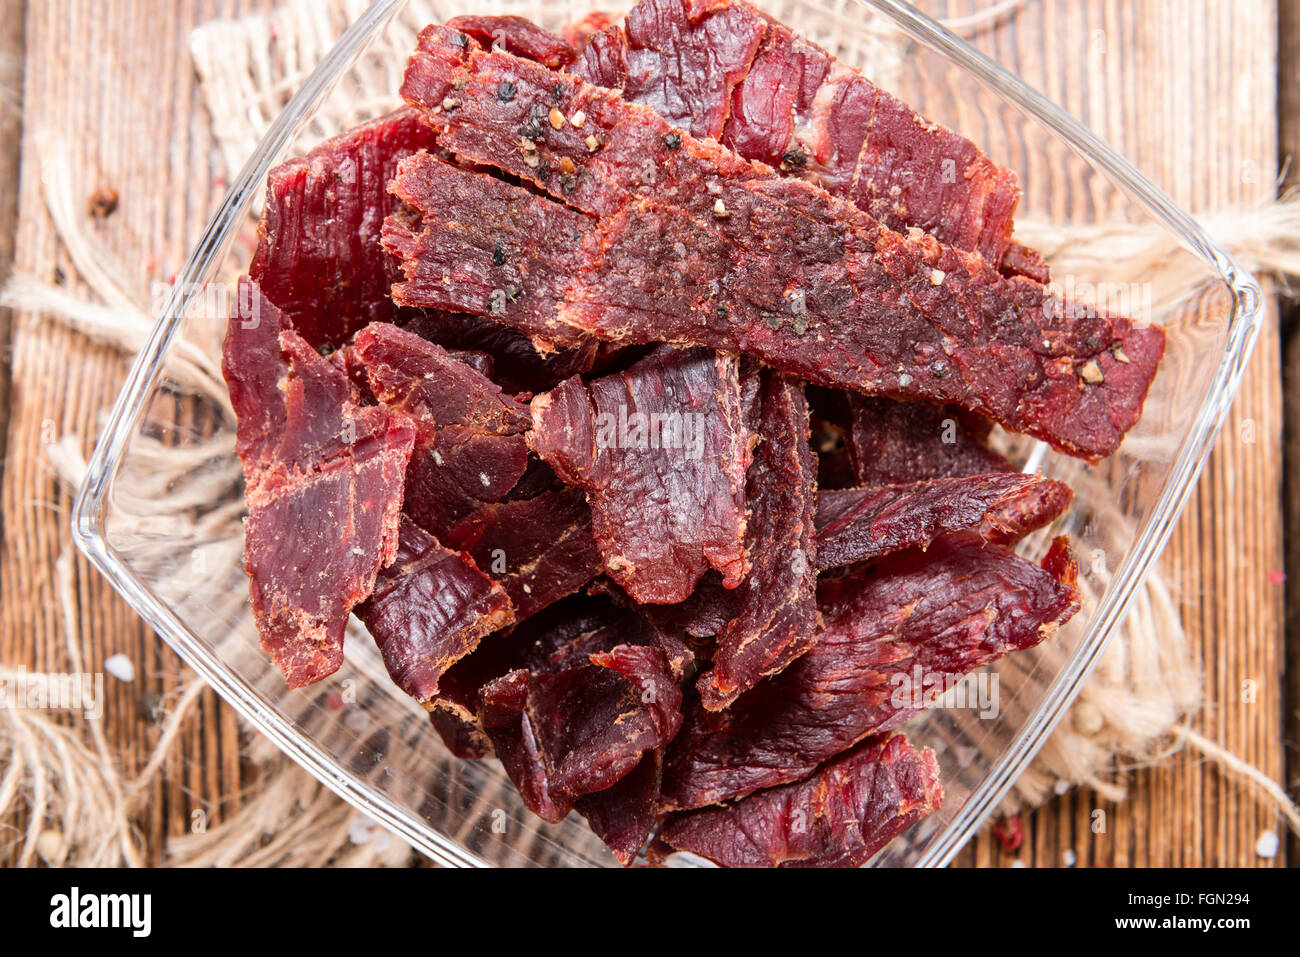 Spicy Beef Jerky On Vintage Wooden Background Close Up Shot Stock